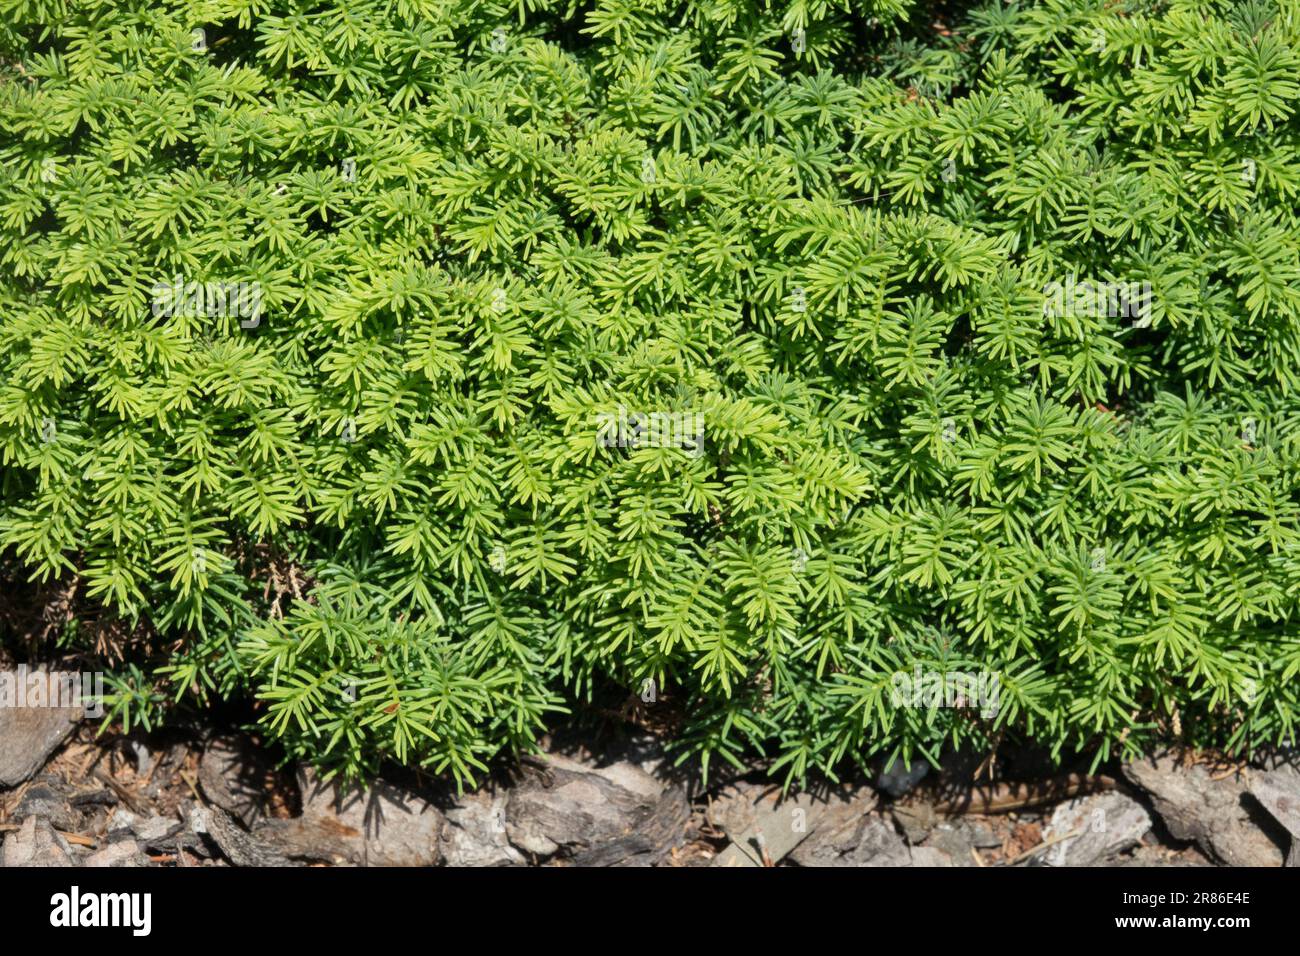 Norway spruce, Picea abies "Little Gem" Spruce foliage Stock Photo